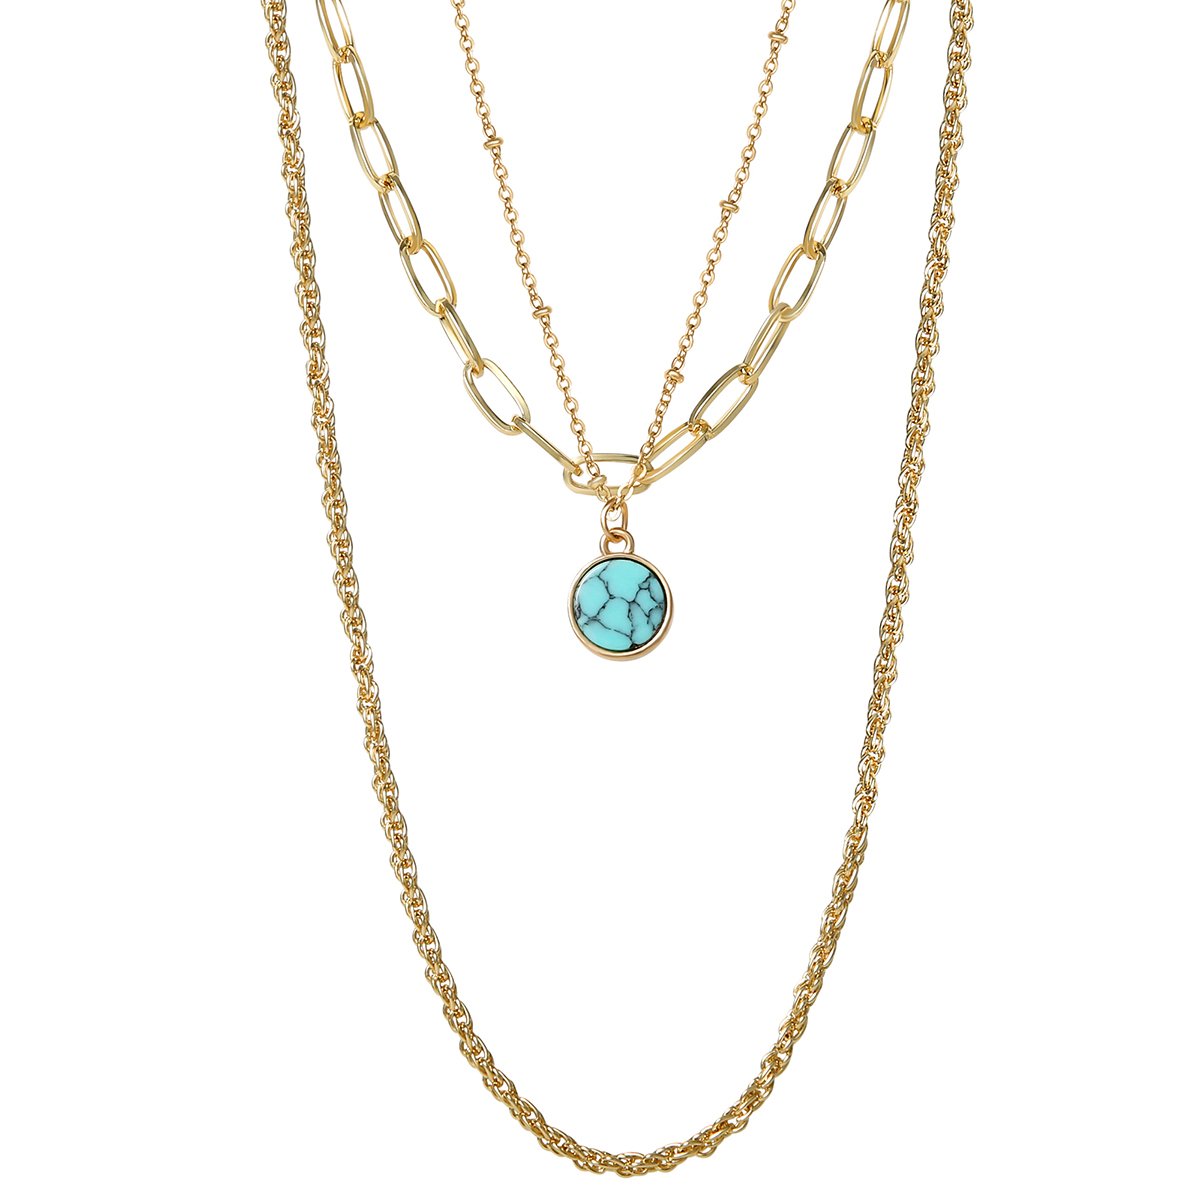 Jessica Simpson 3pc. Heart & Chain Layered Necklace